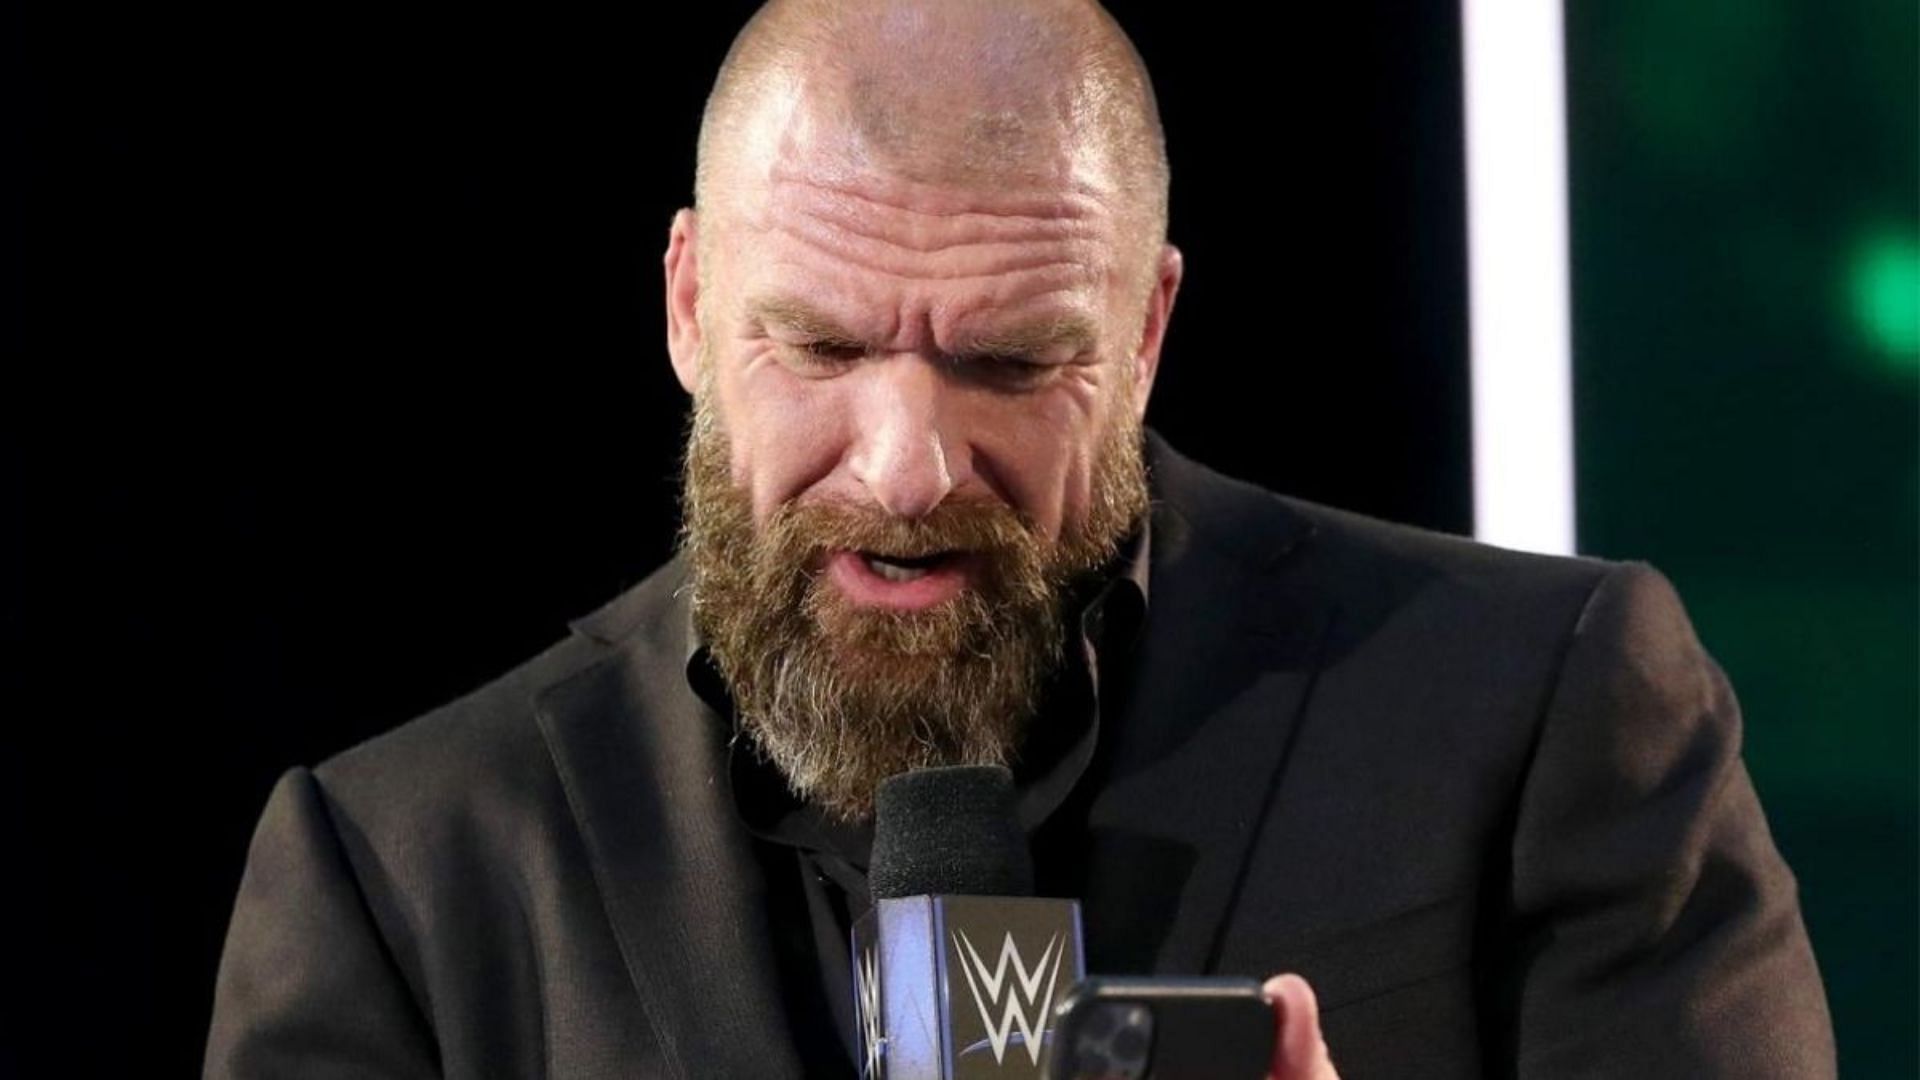 Triple H has made massive changes to the shows since taking charge